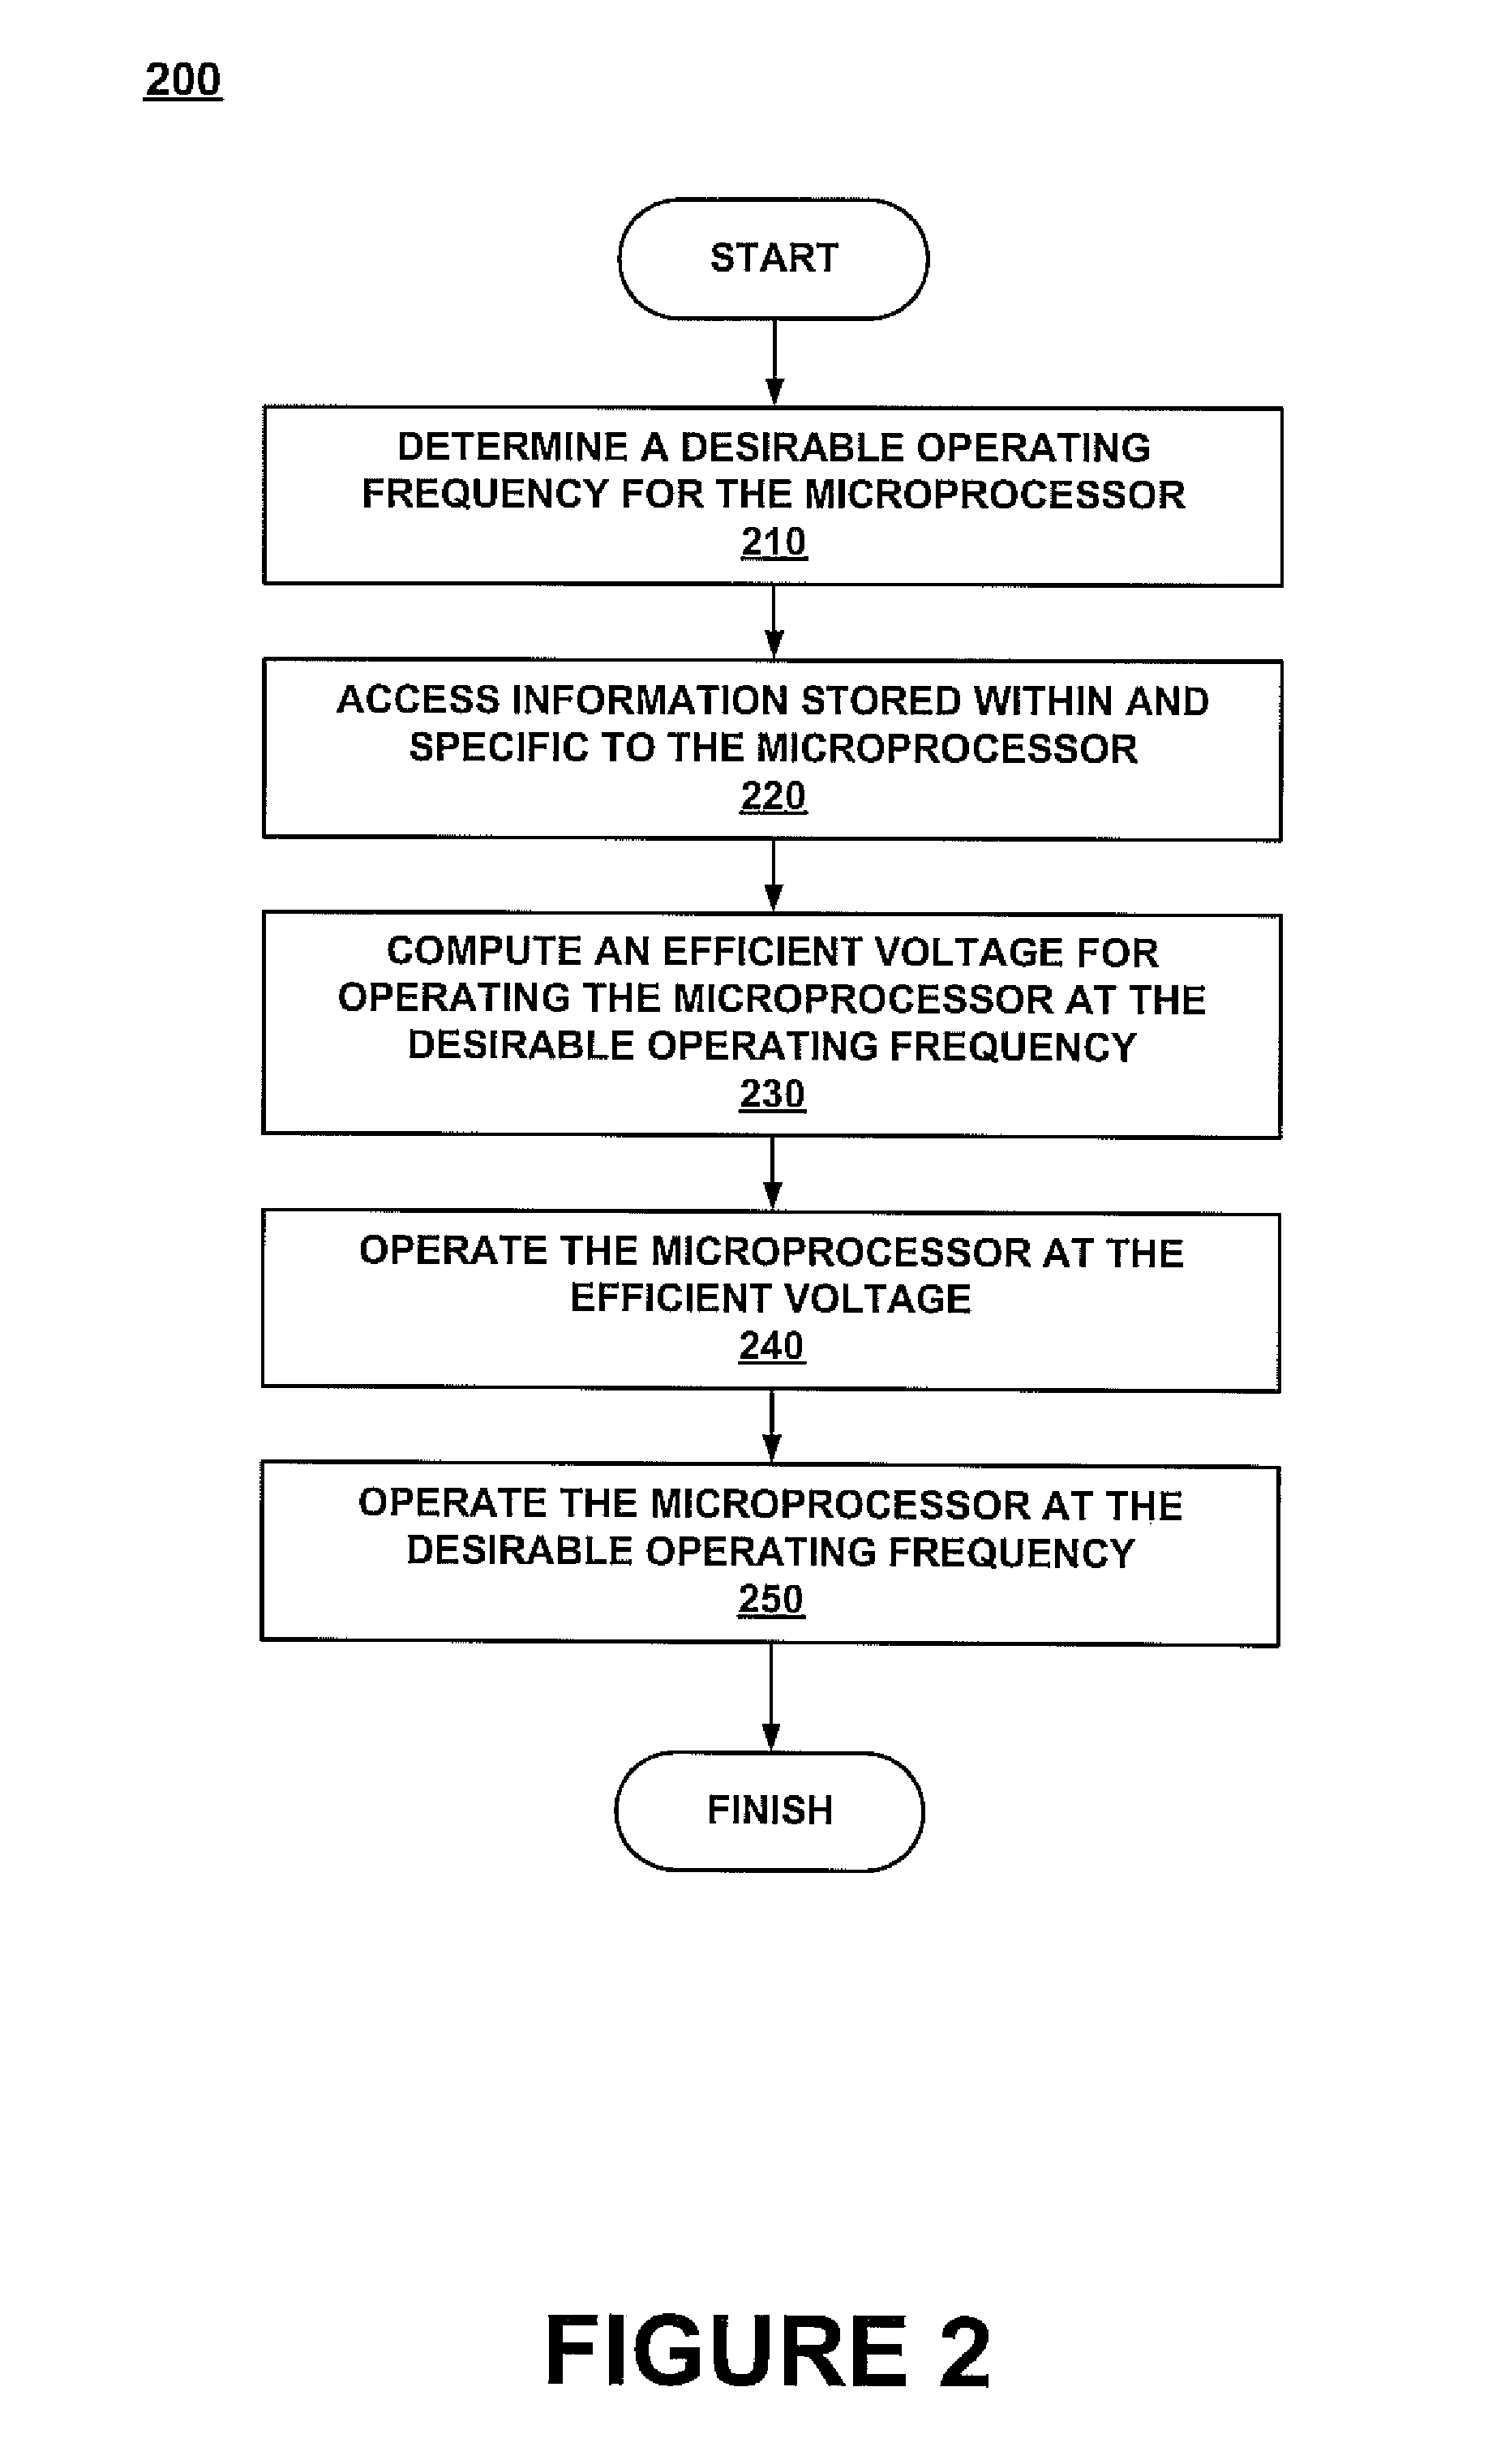 Adaptive control of operating and body bias voltages